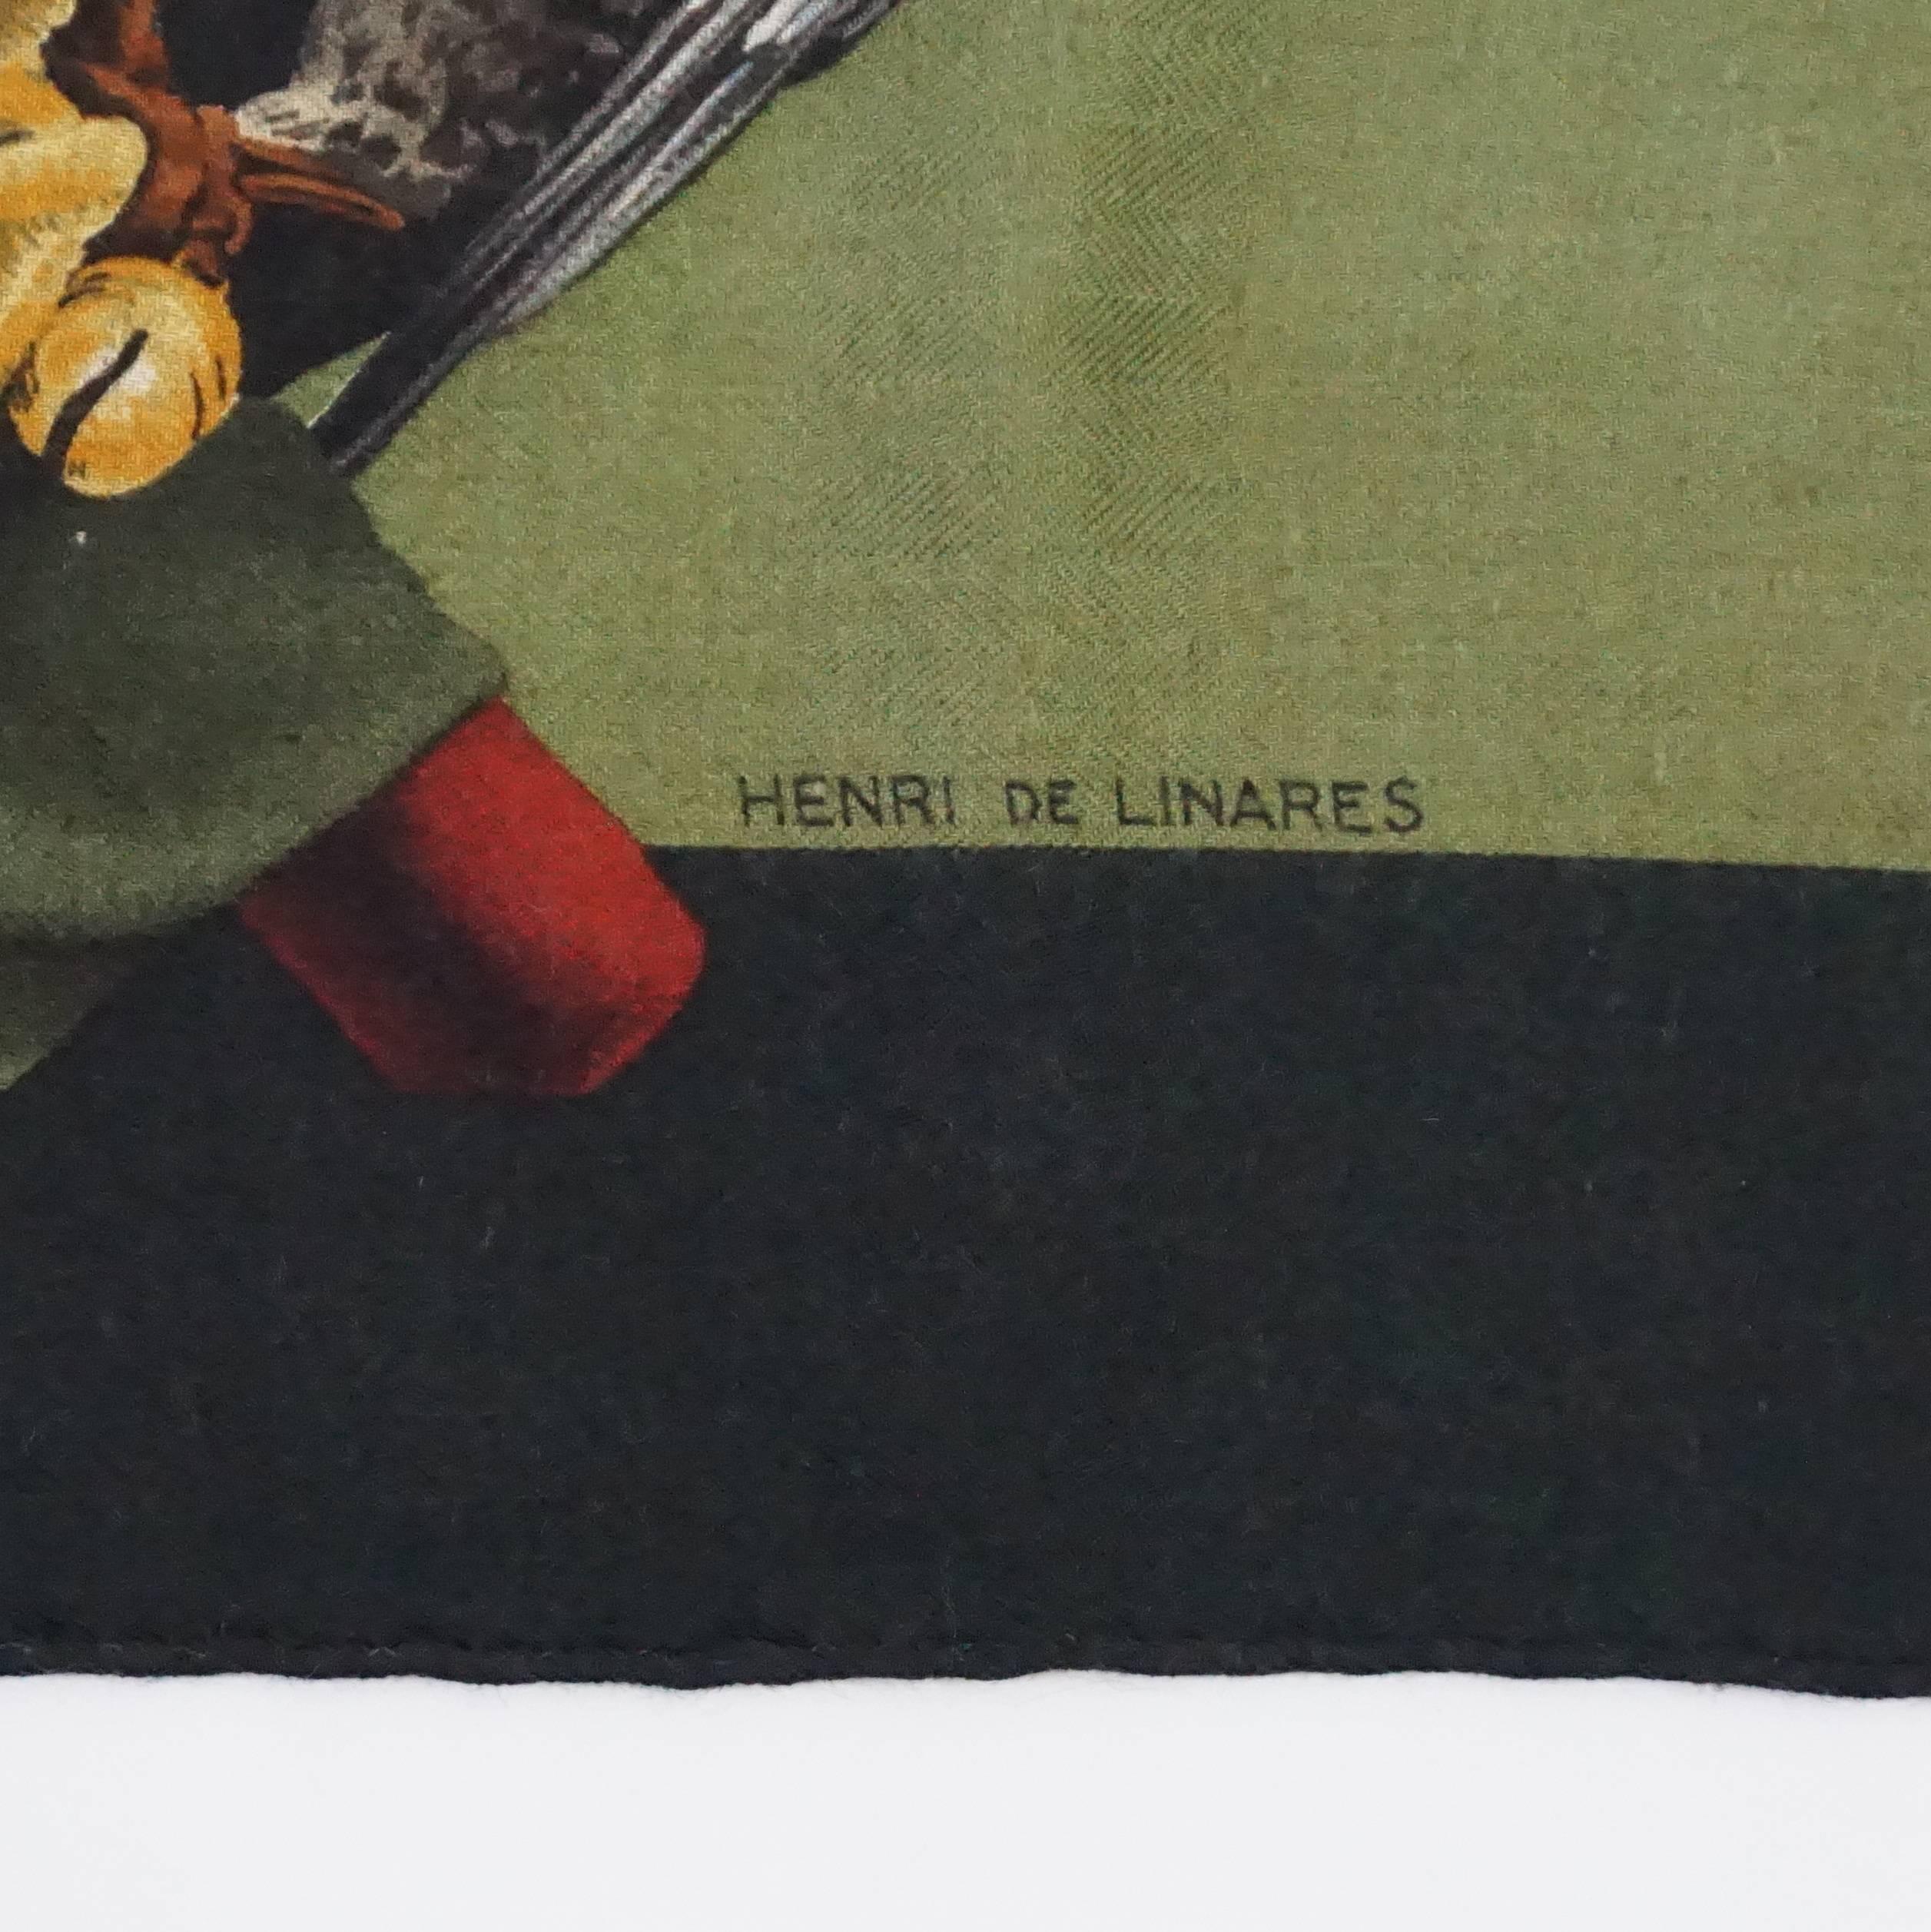 This Hermes olive green scarf is a cashmere blend and has a hawk print all over. The theme's title is 